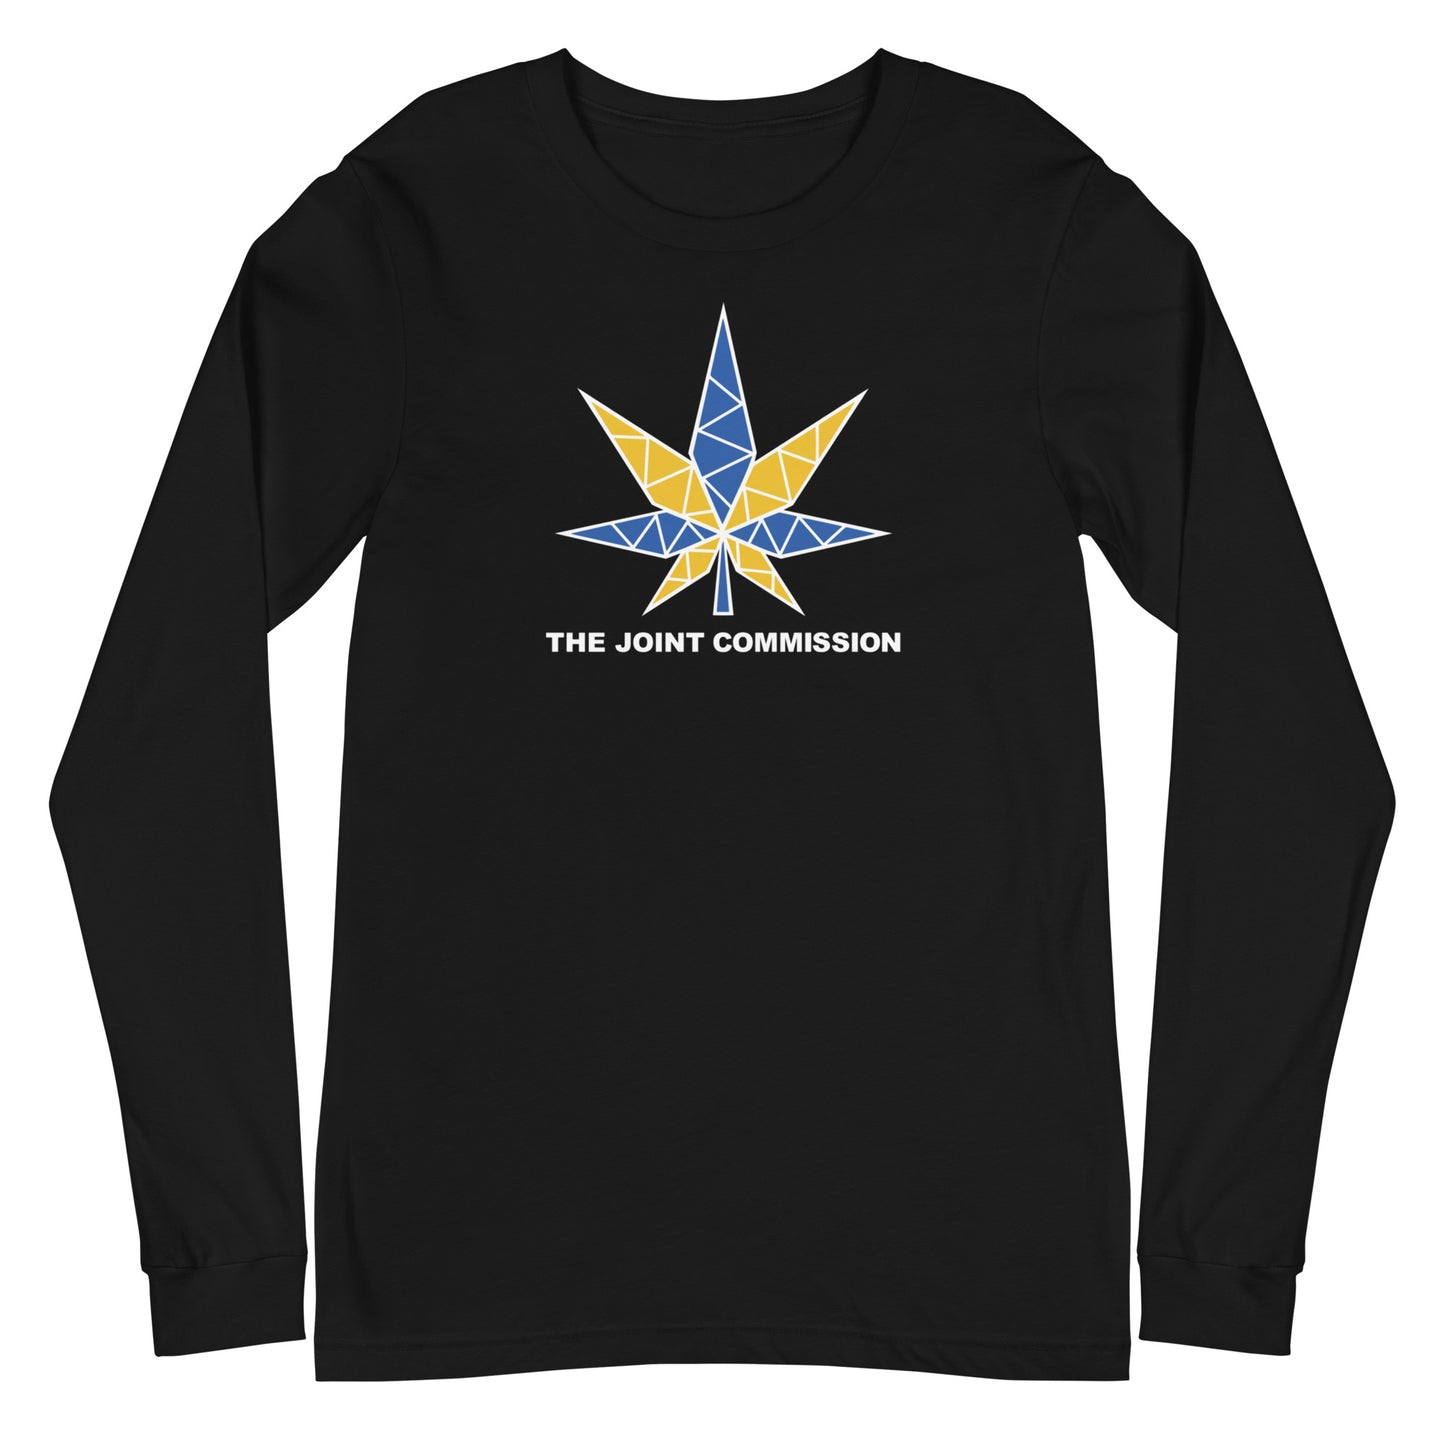 The Joint Commission Long Sleeve Tee